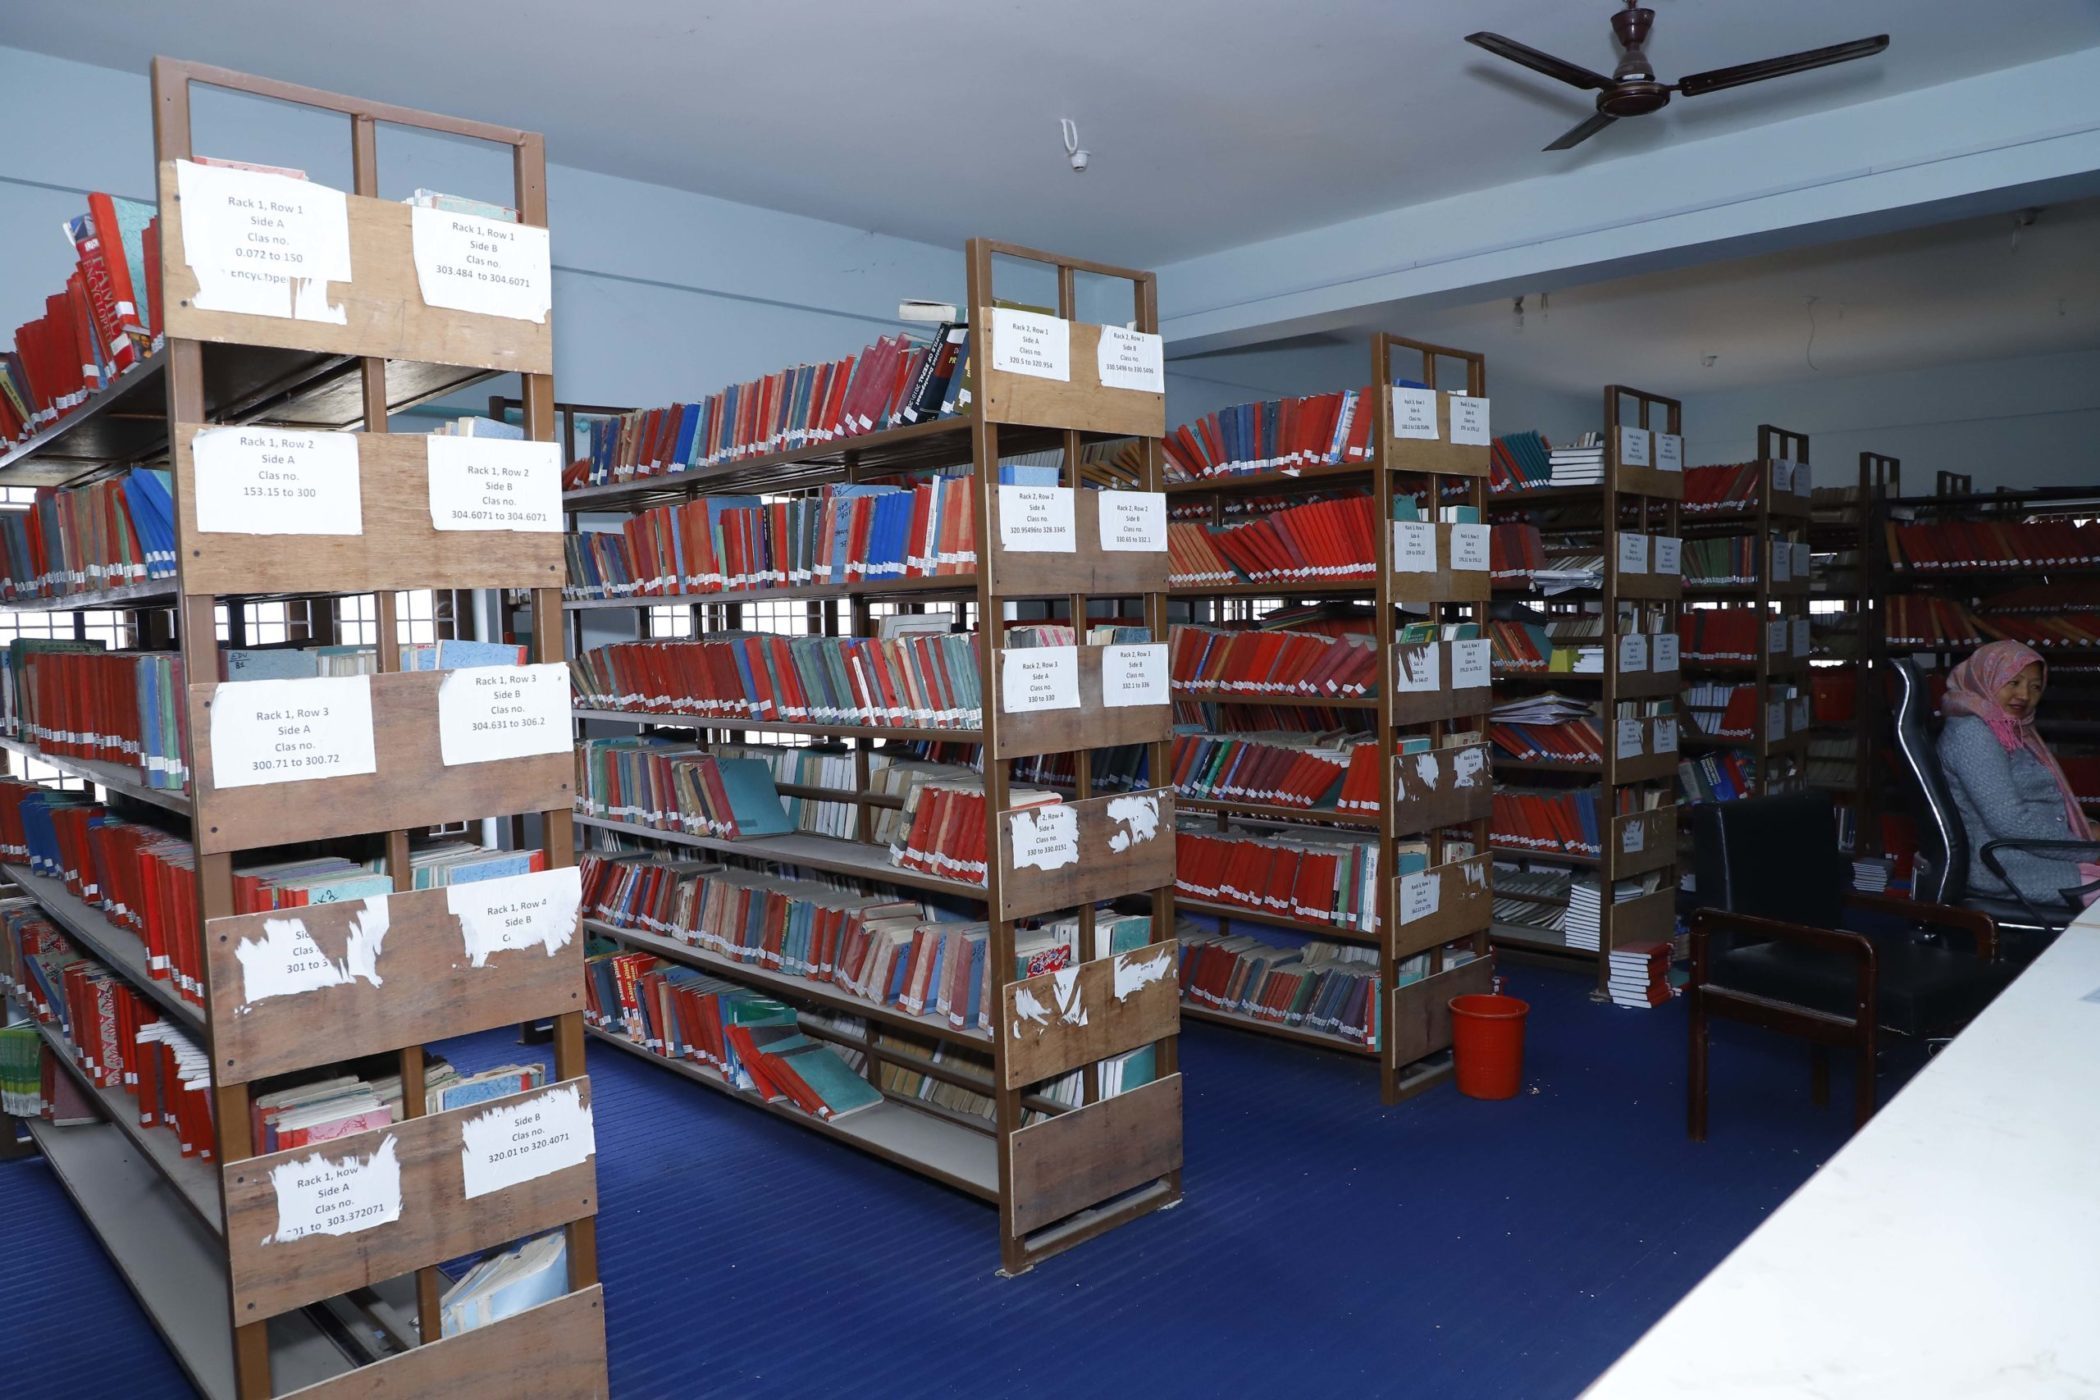 KMC Central Library